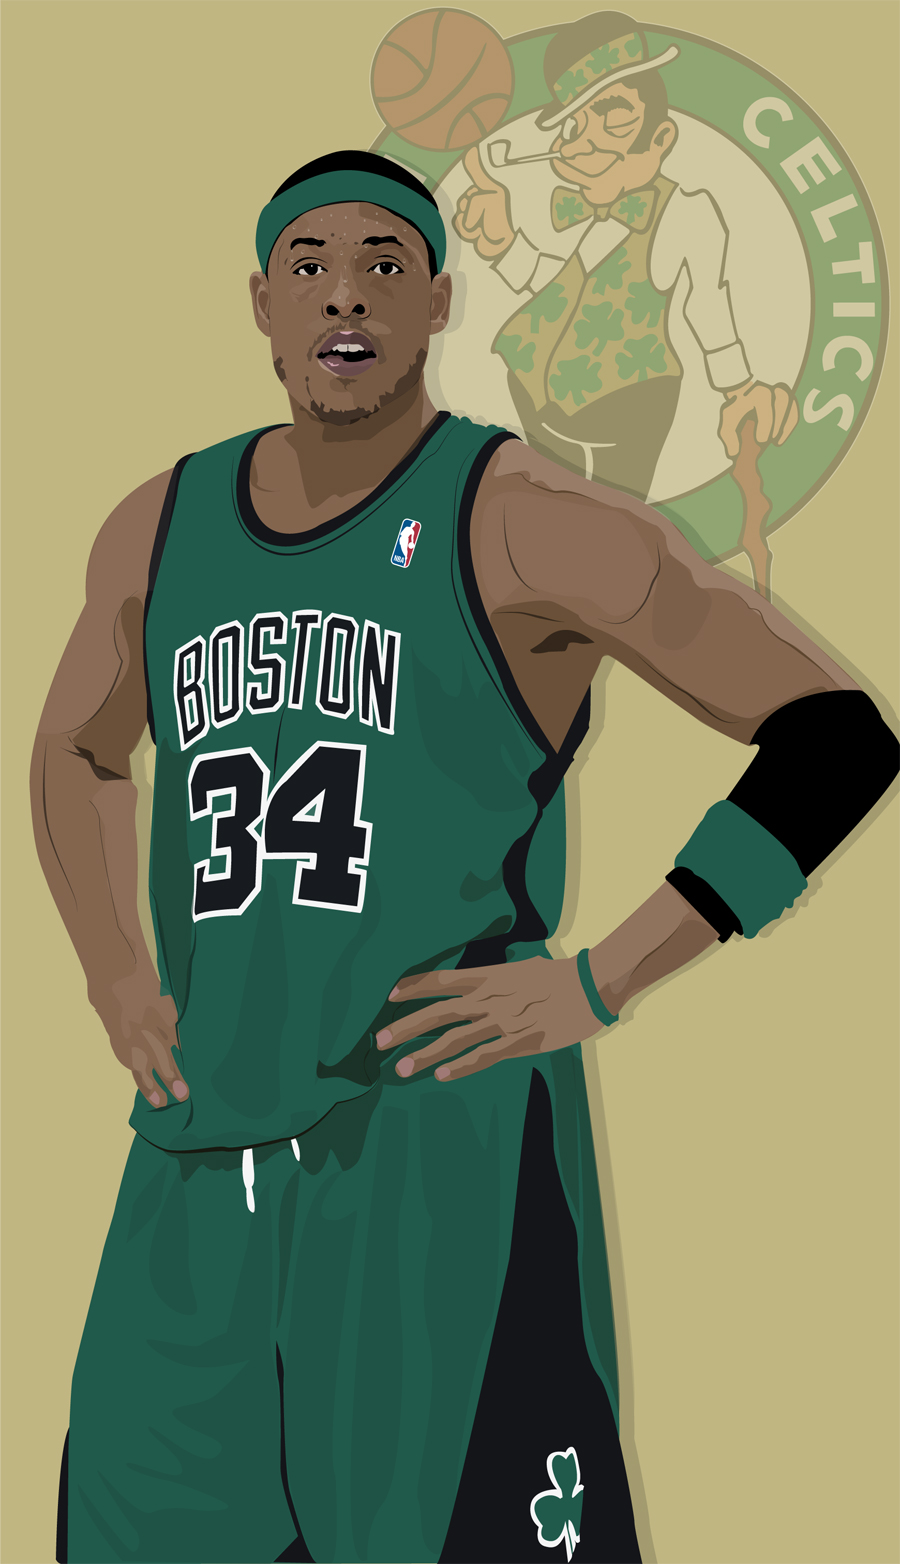 Paul Pierce by console master on